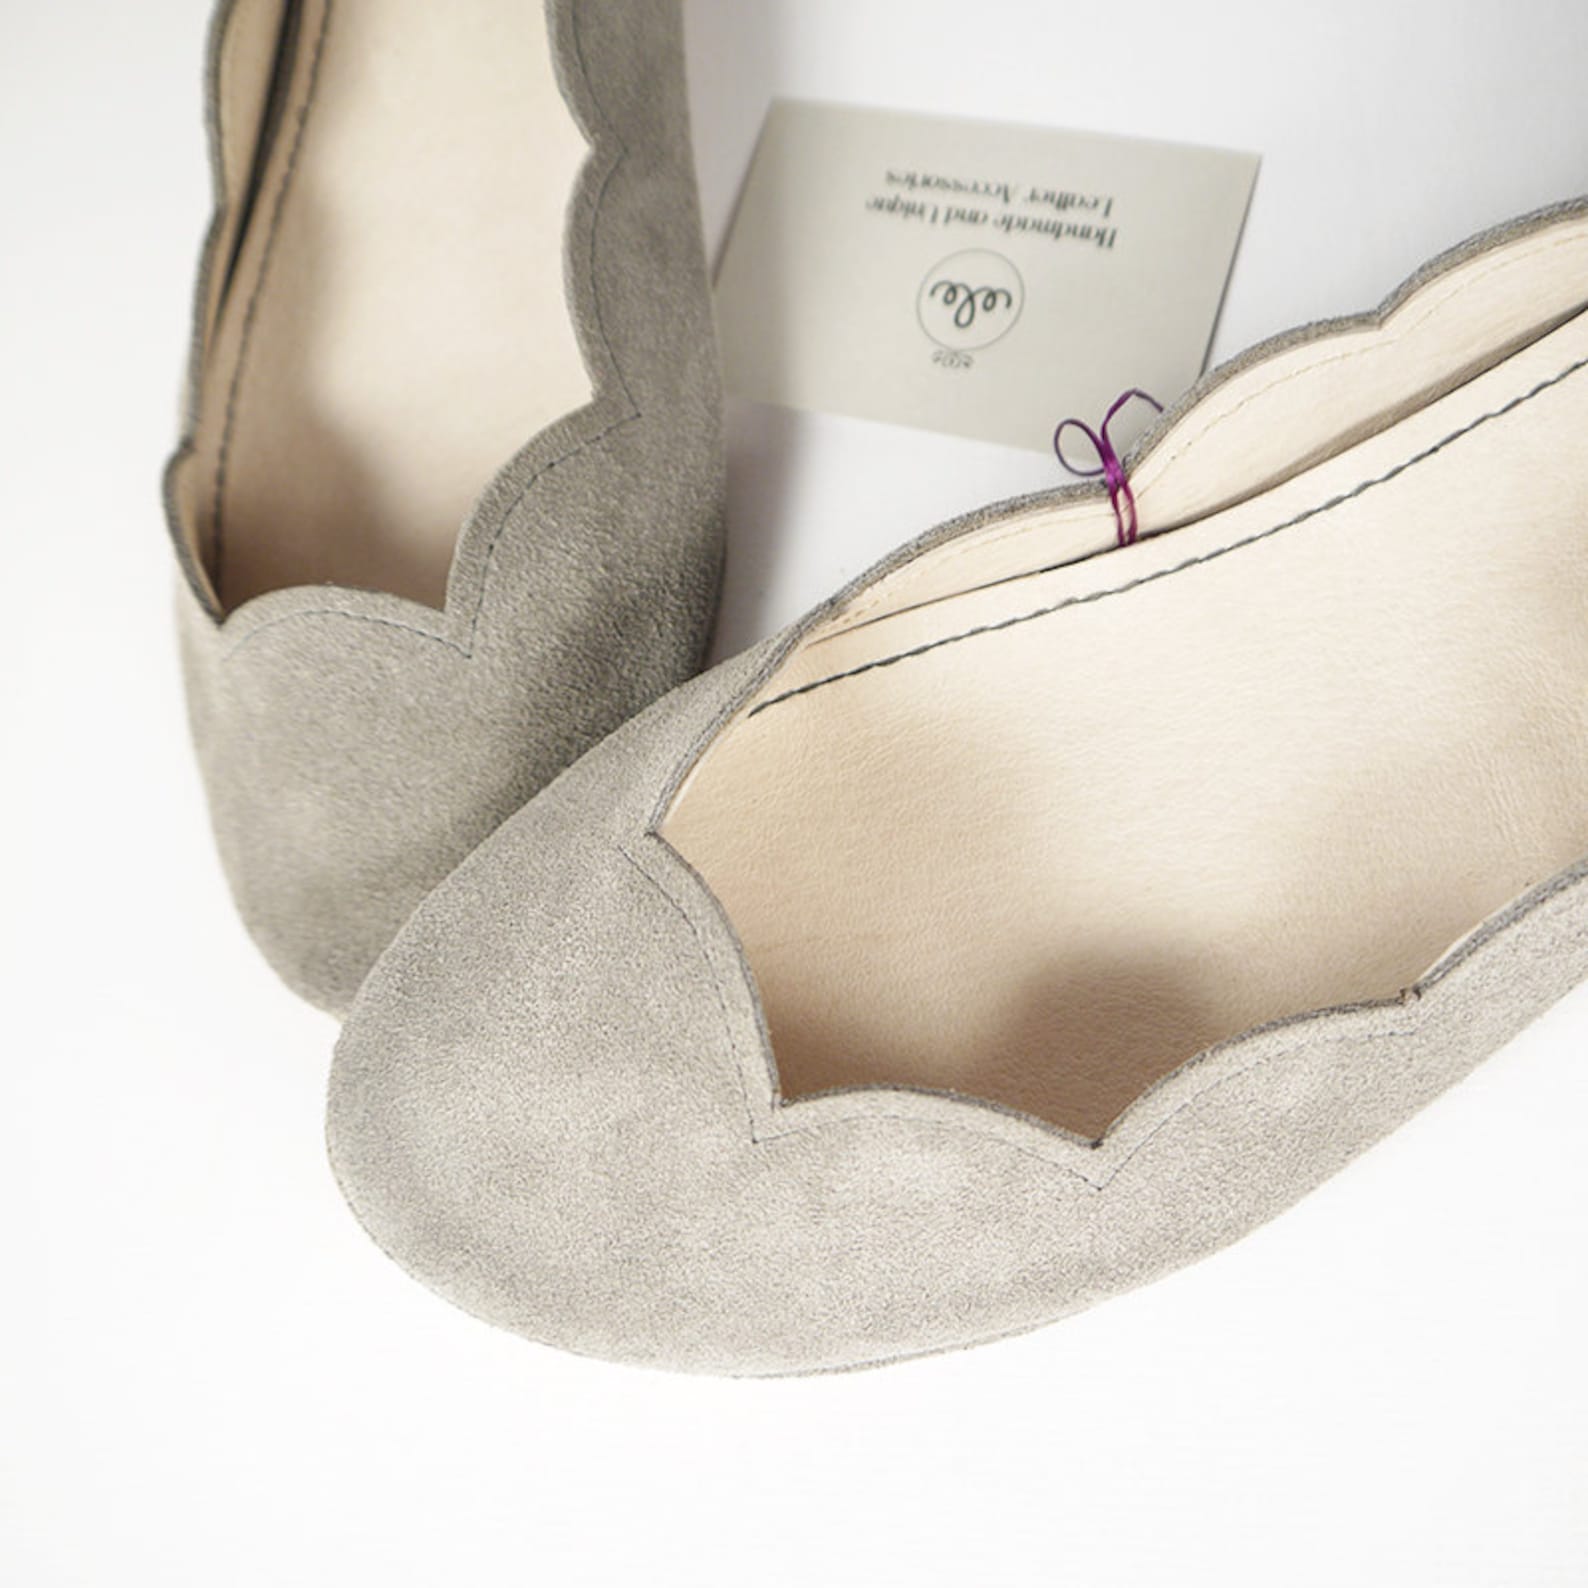 leather shoes. ballet flats shoes. pearl wedding shoes. bridal low heel. brautschuhe. leather flats. scalloped gray flats. handm